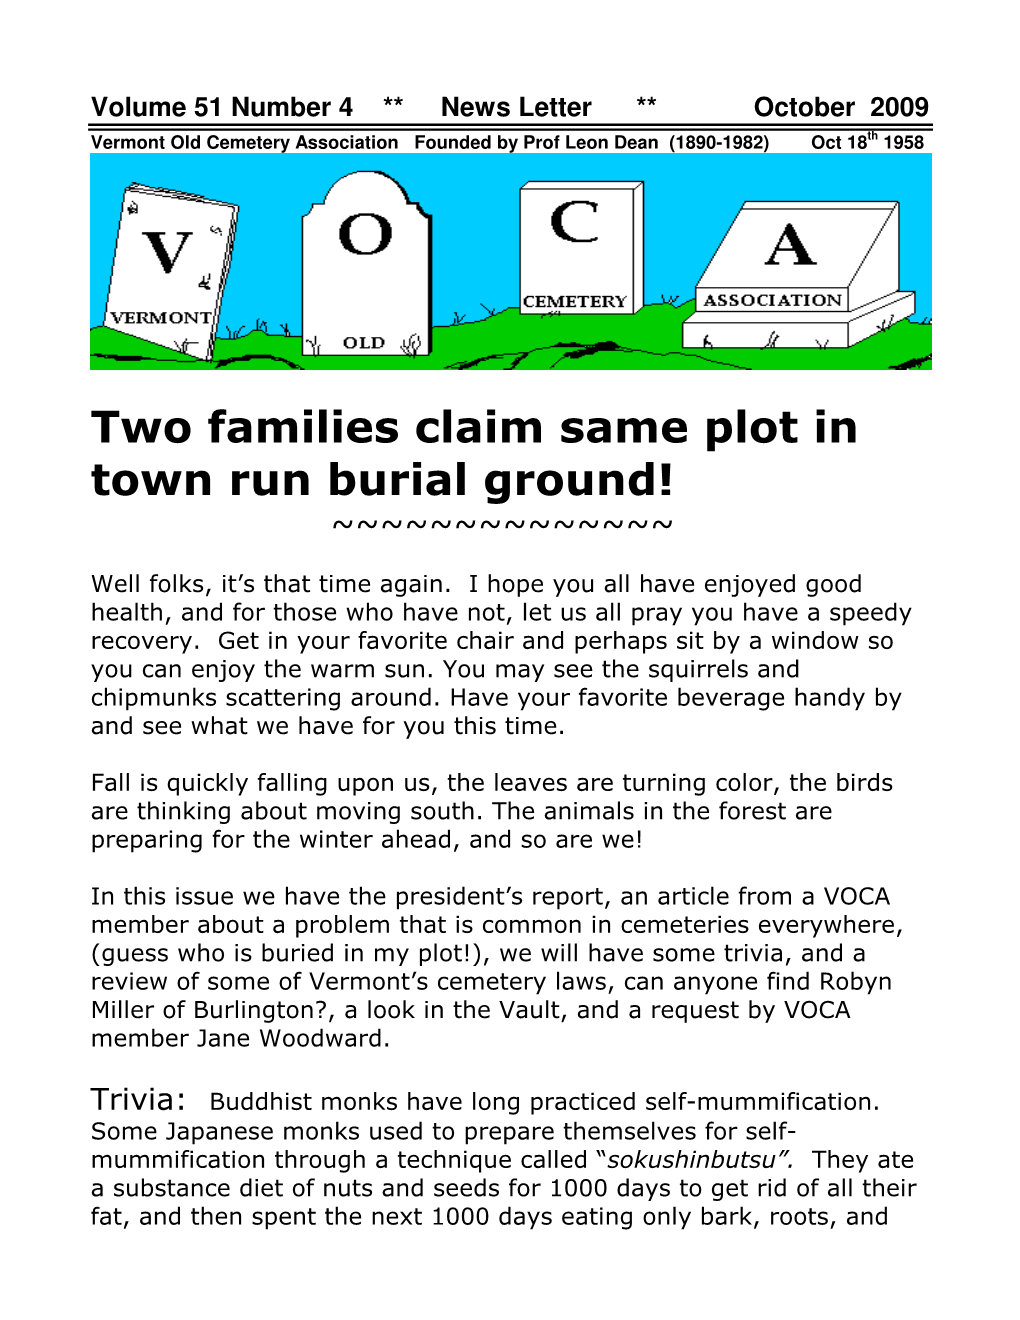 Two Families Claim Same Plot in Town Run Burial Ground! ~~~~~~~~~~~~~~